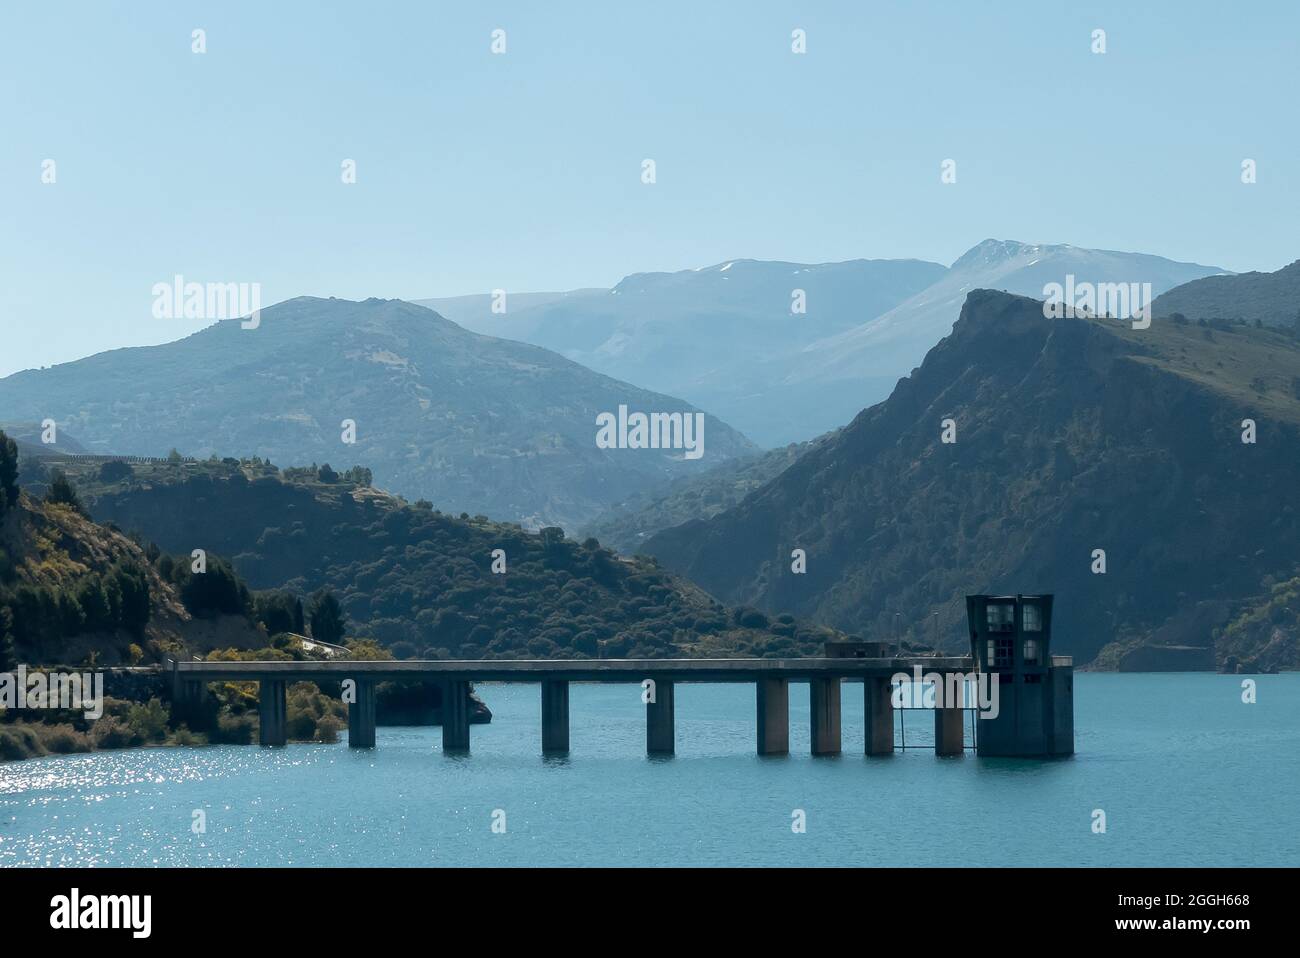 Granada in Spain: the turquoise waters of the Embalse de Canales. Stock Photo